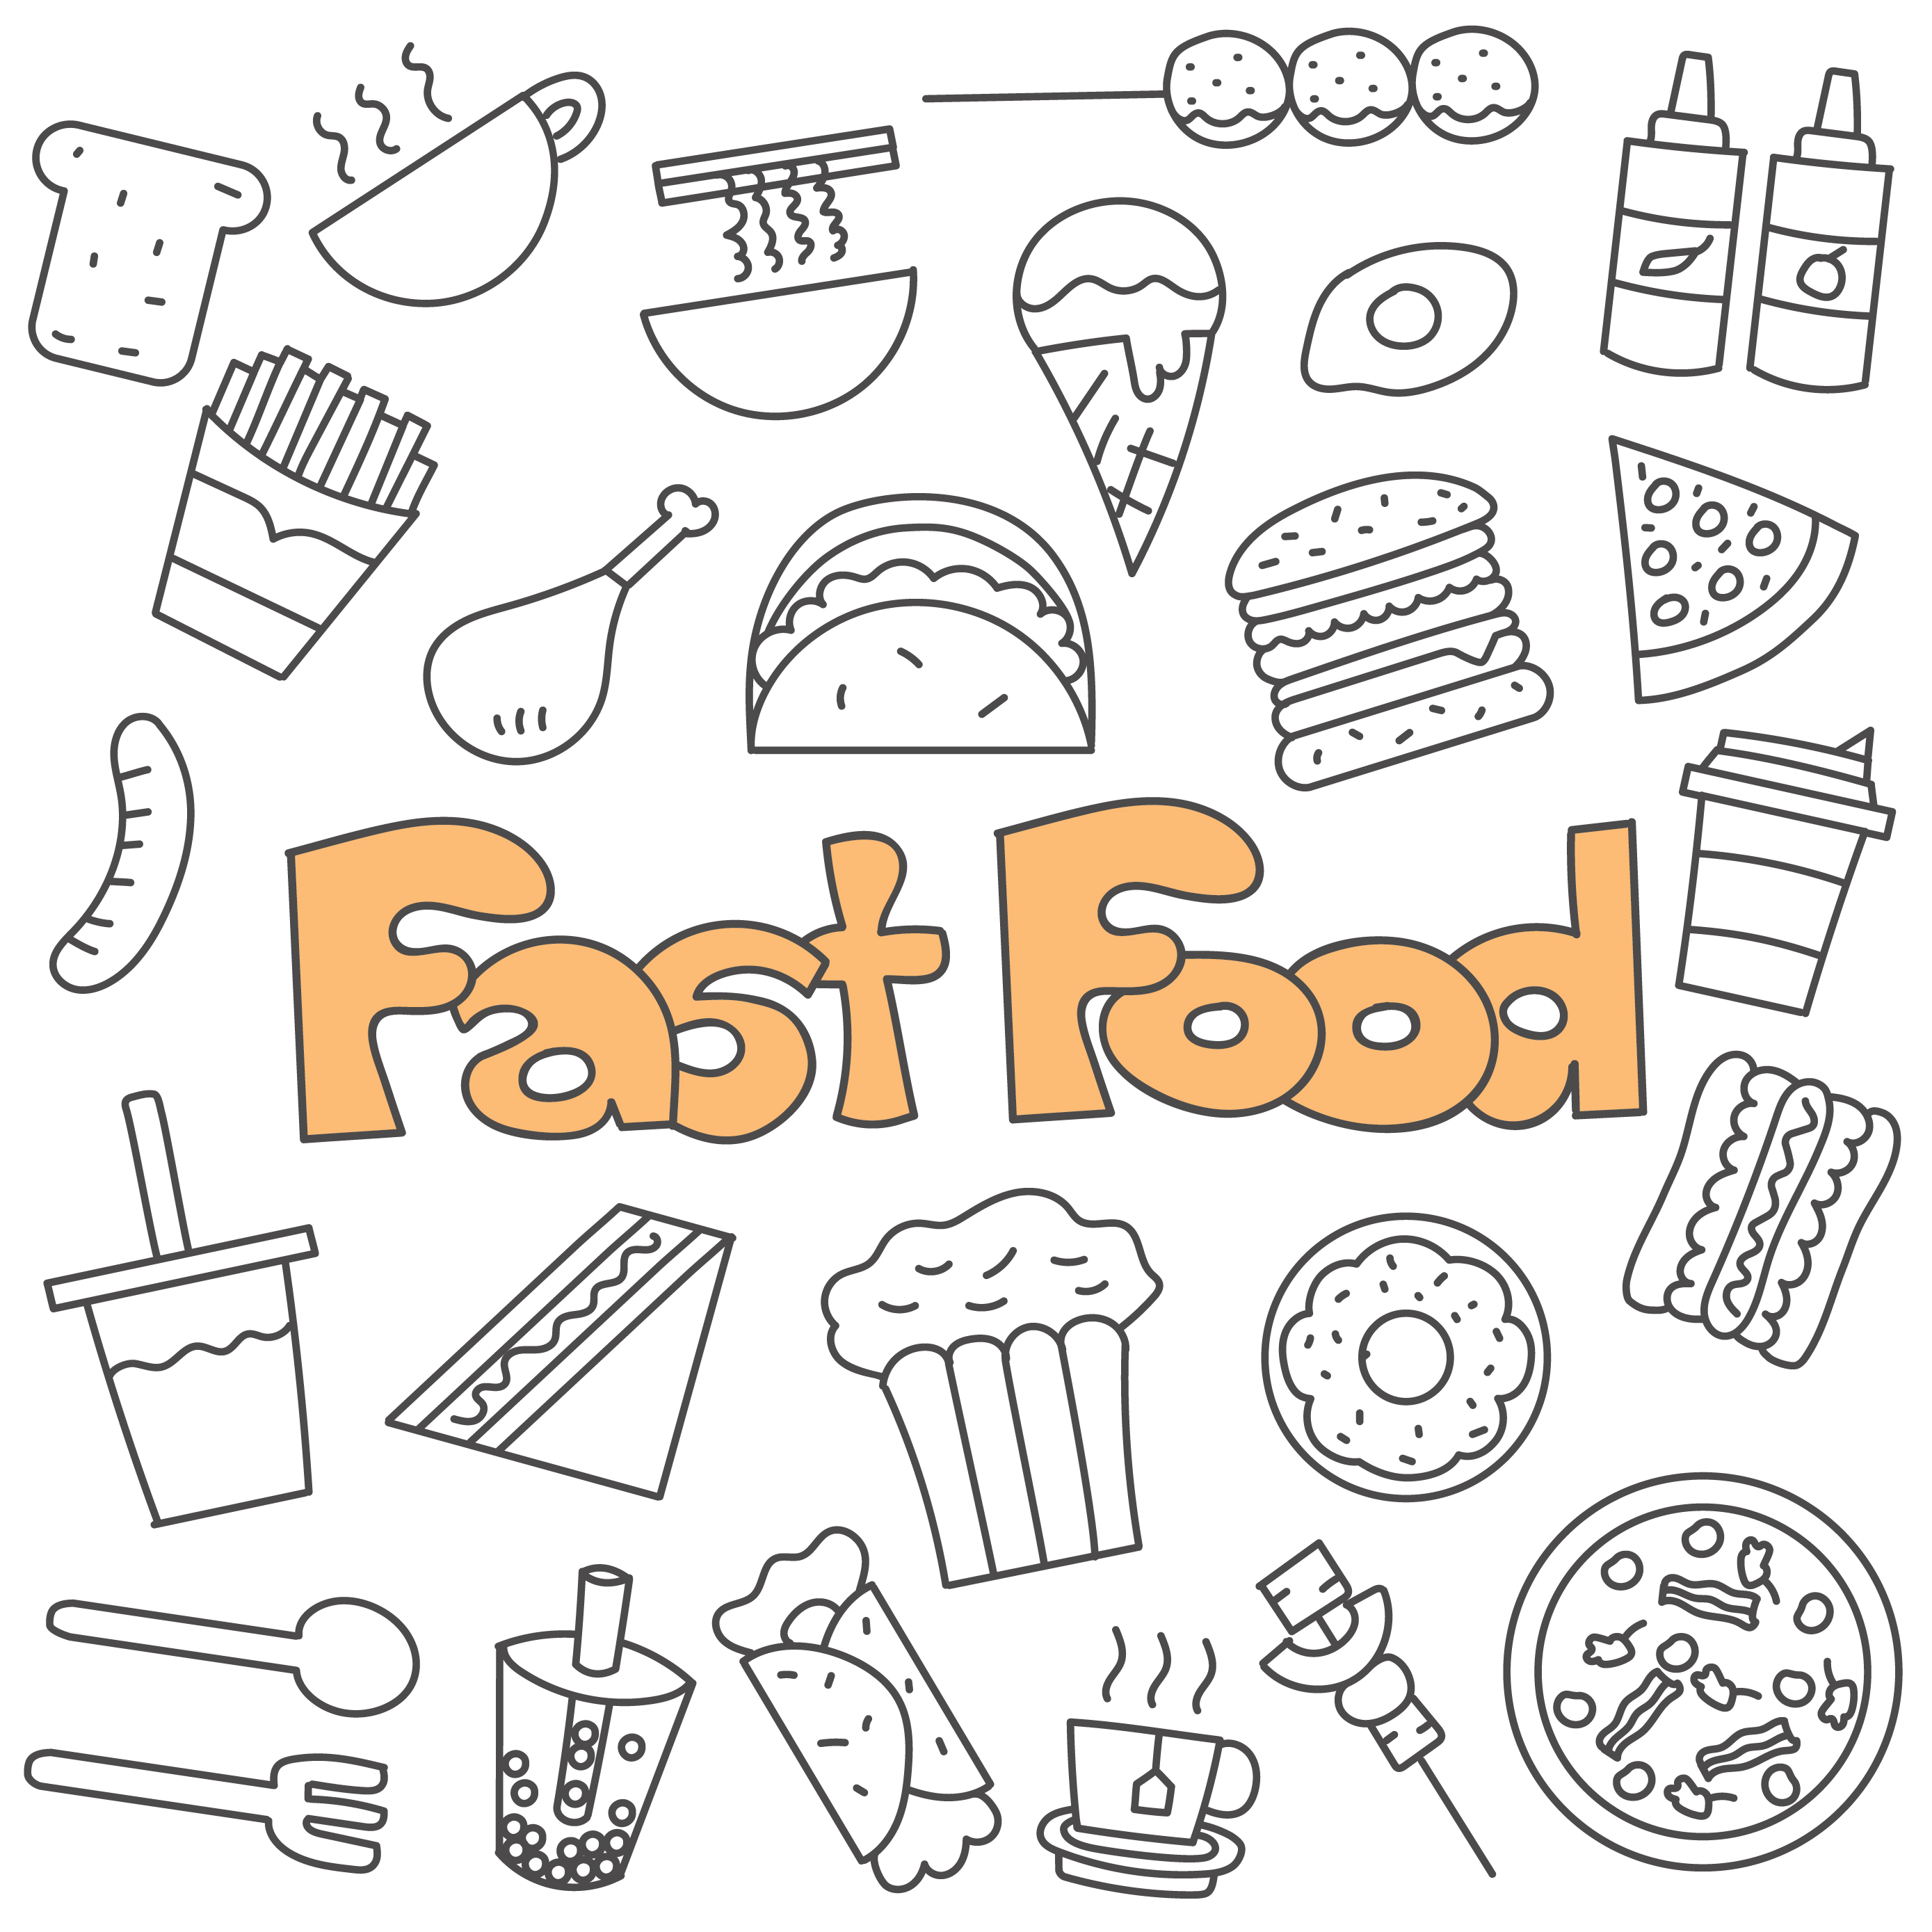 hand-drawn-doodle-of-fast-food-set-628248-vector-art-at-vecteezy